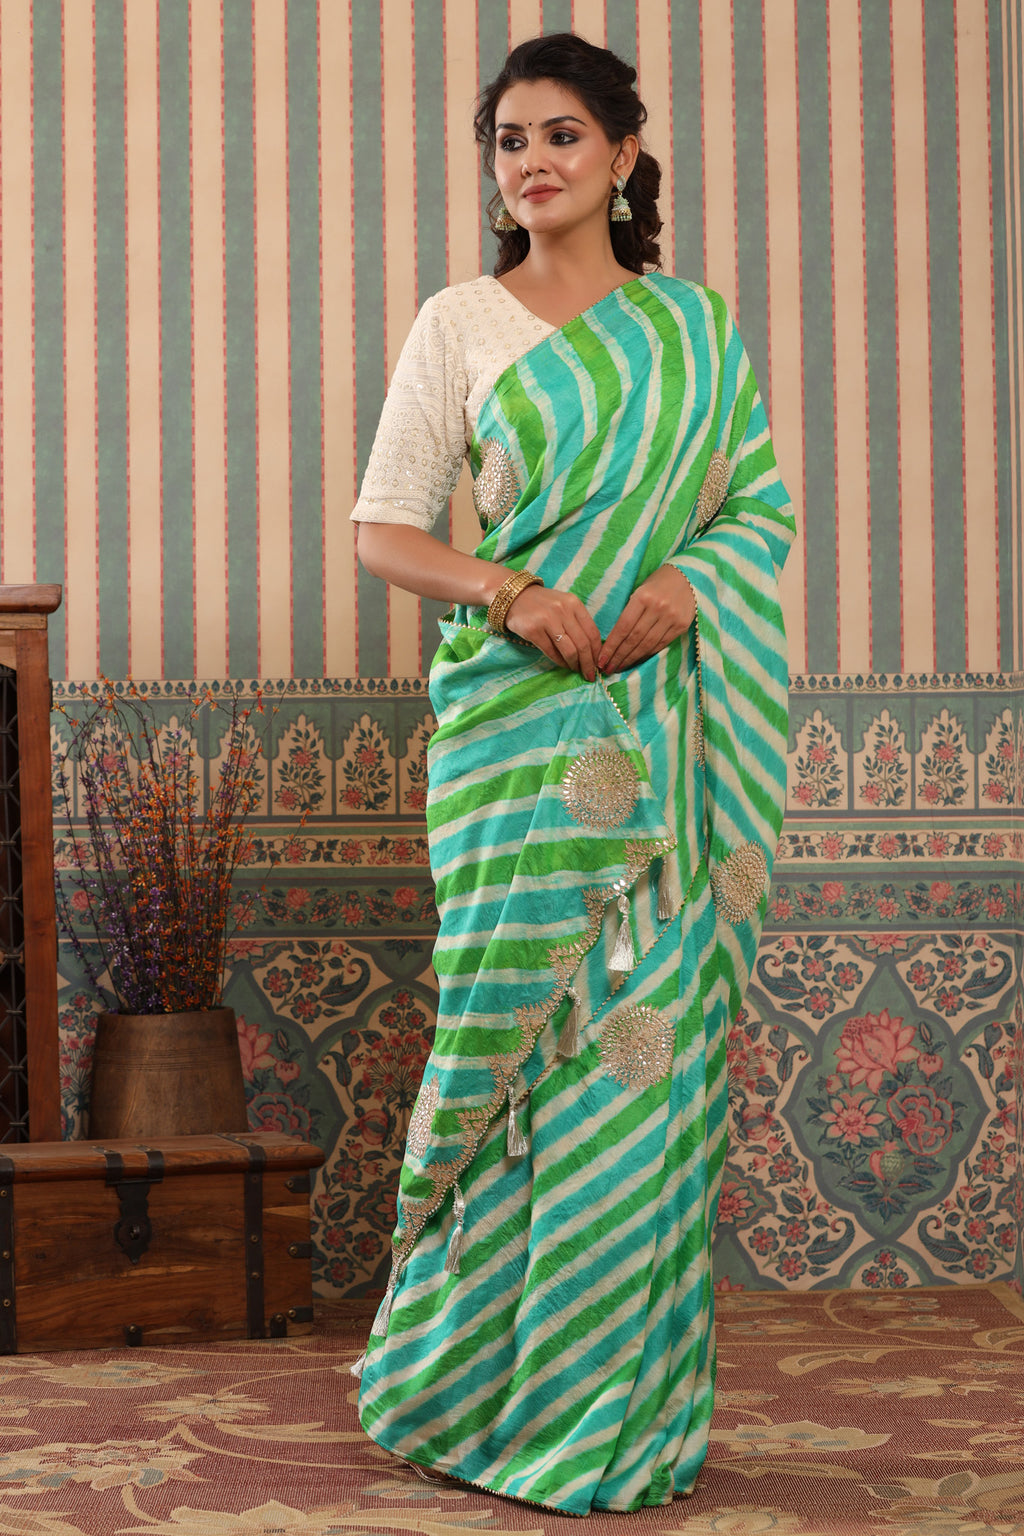 Buy green striped tussar silk sari online in USA with saree blouse.. Make a fashion statement at weddings with stunning designer sarees, embroidered sarees with blouse, wedding sarees, handloom sarees from Pure Elegance Indian fashion store in USA.-full view